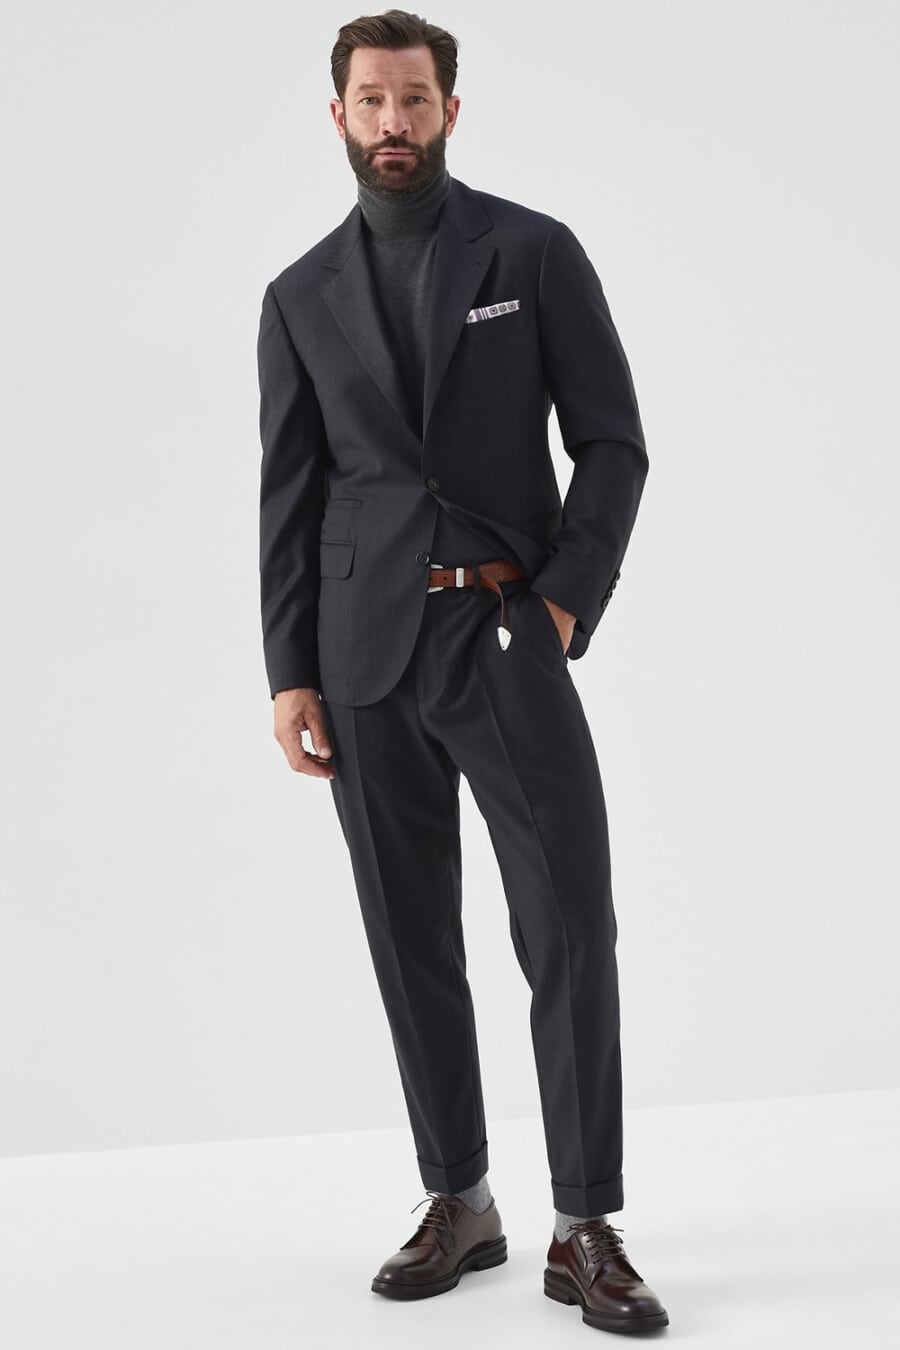 Men's charcoal cropped leg suit, charcoal turtleneck and brown leather shoes outfit